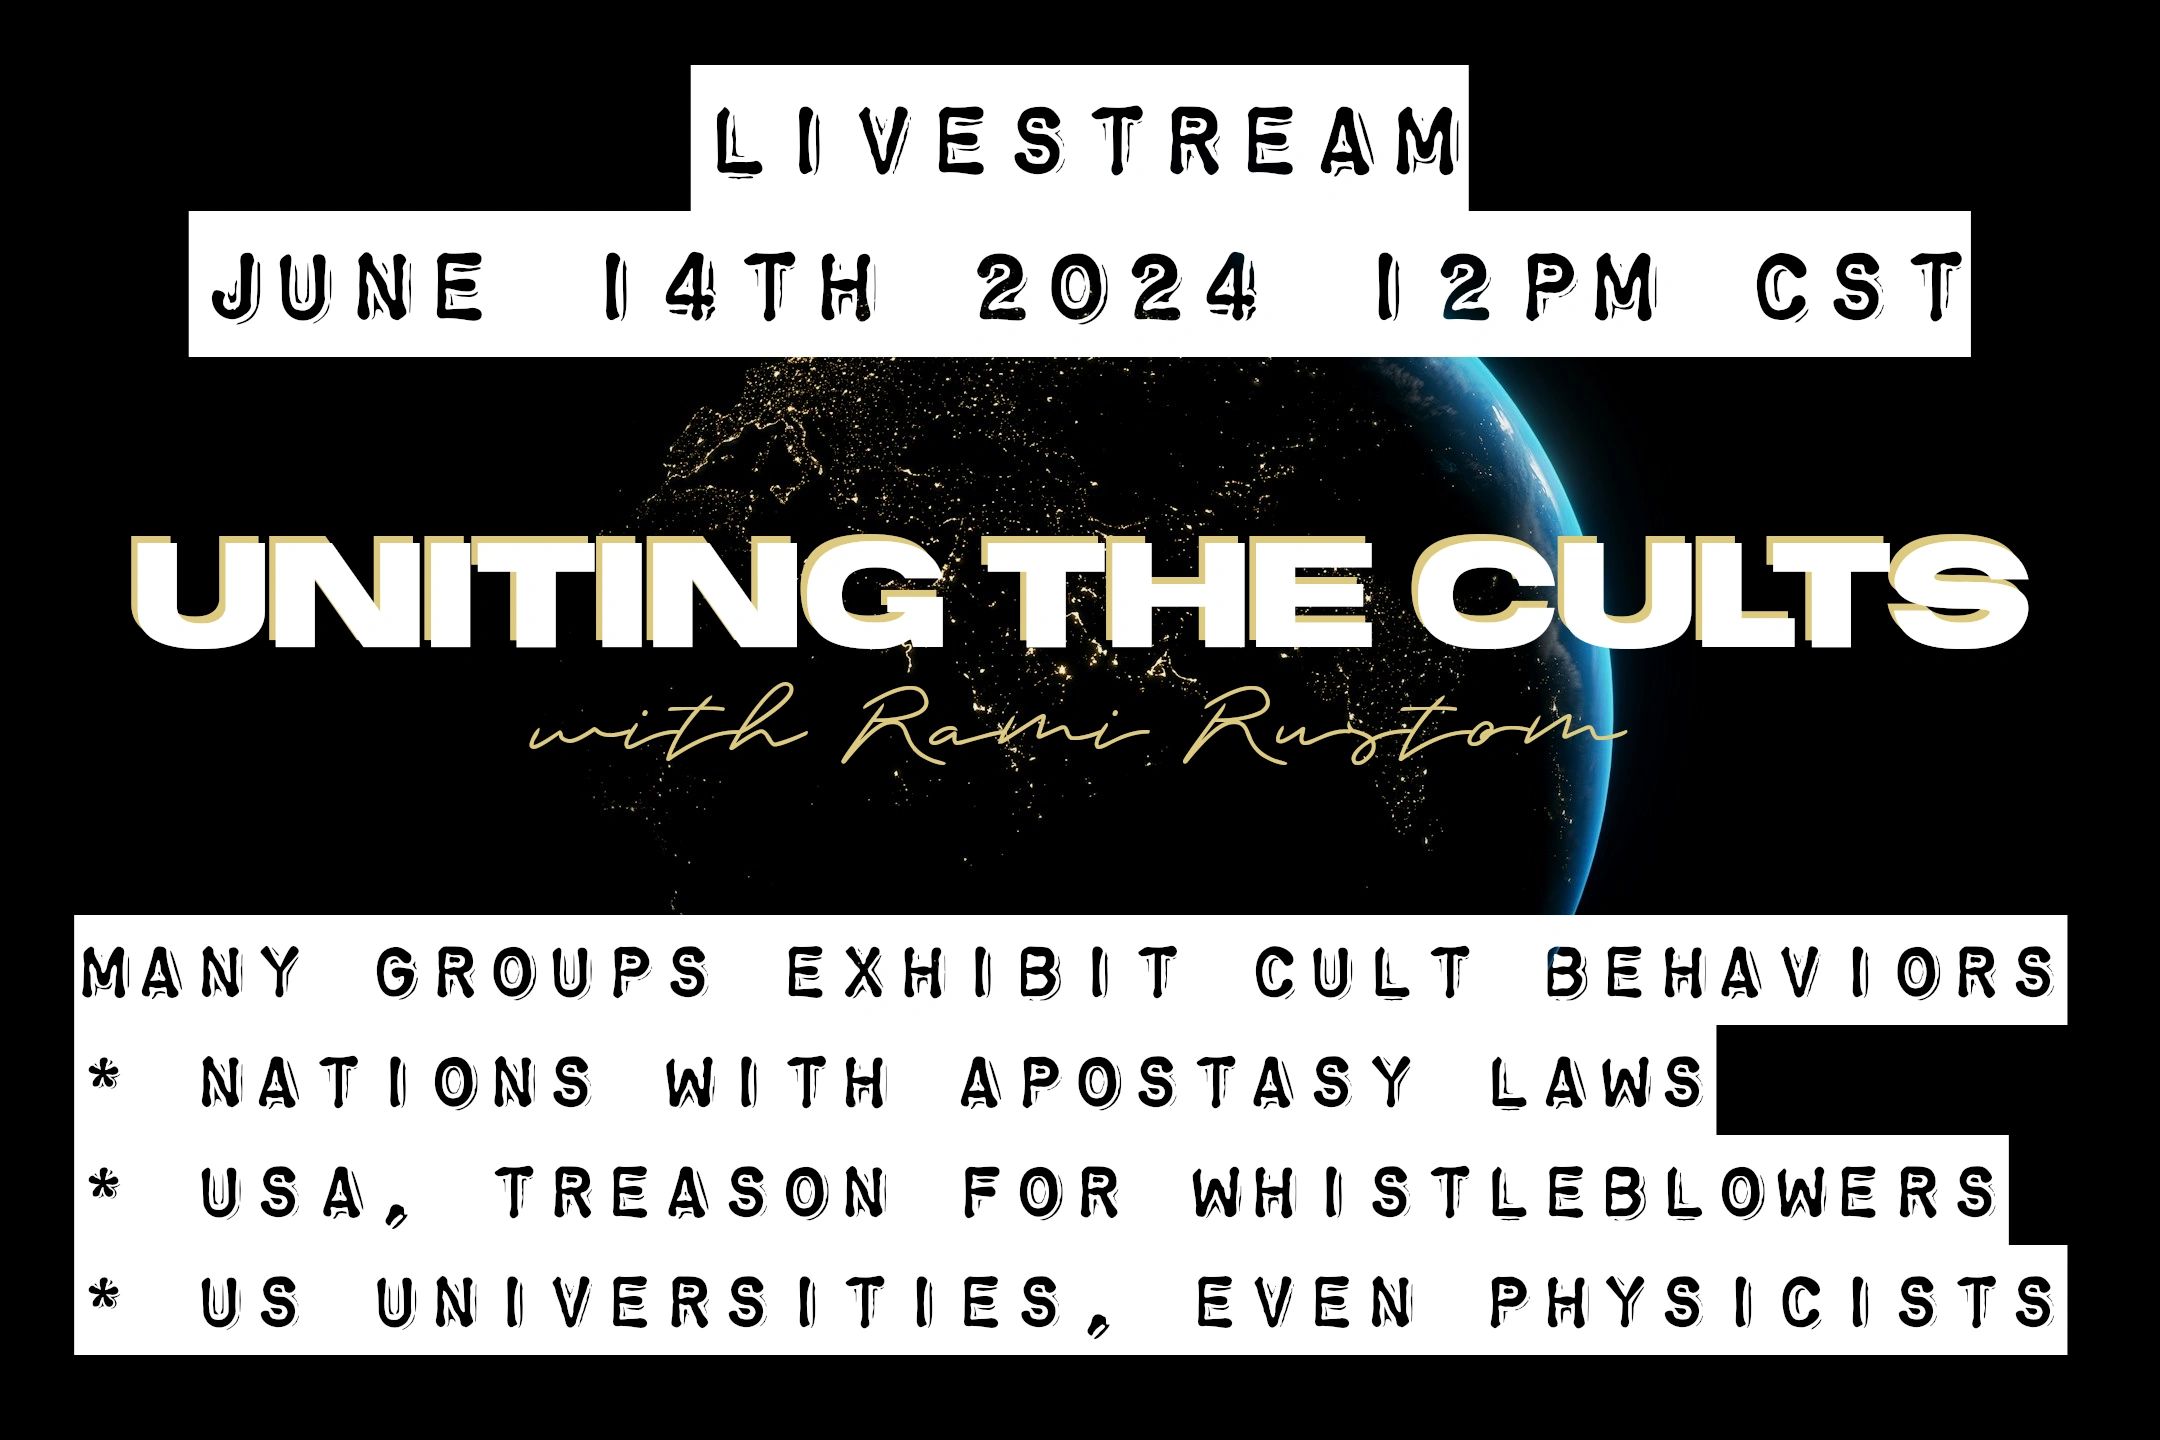 Livestream June 14th 2024 12PM CST

UNITING THE CULTS
with Rami Rustom